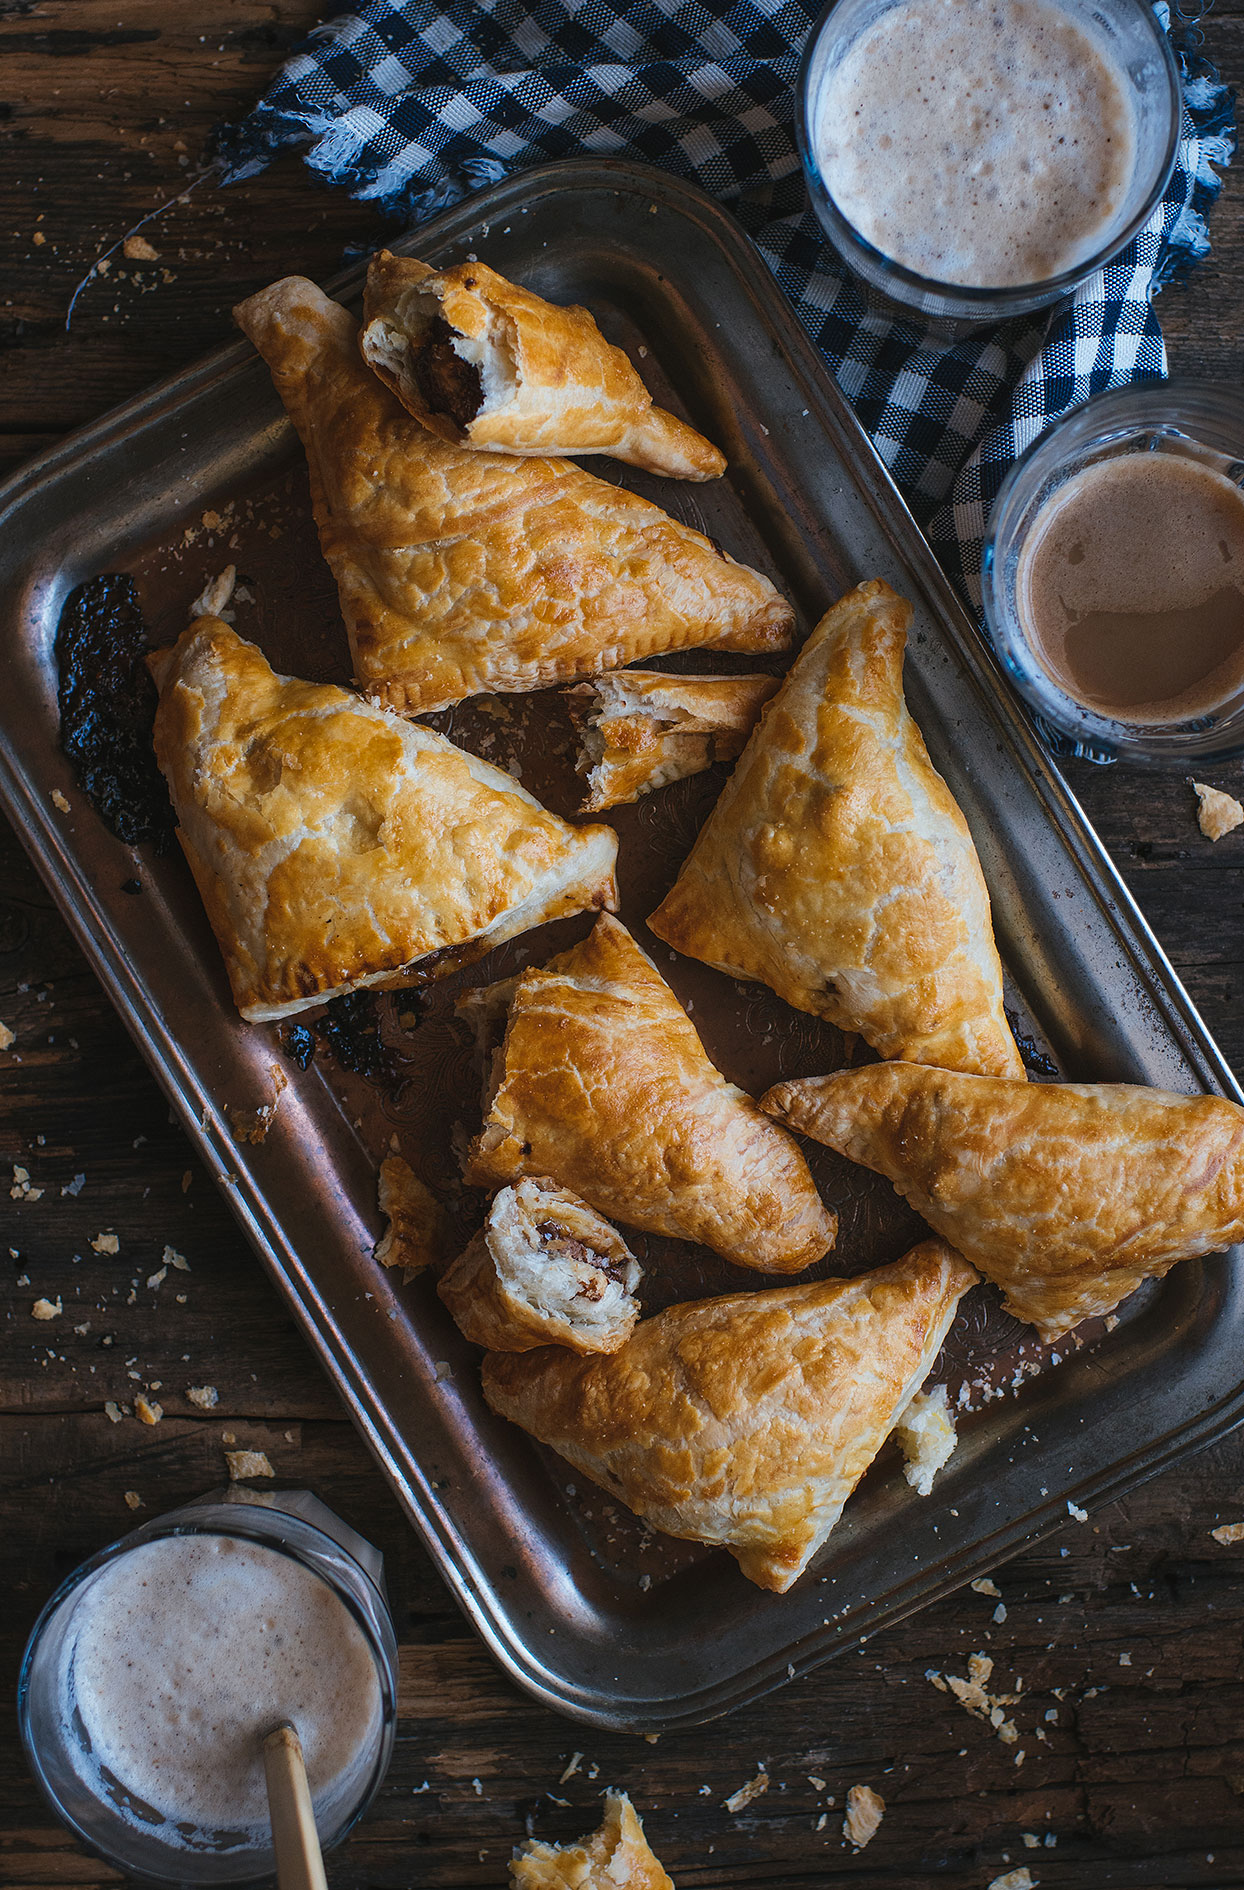 Caramilk turnovers with fleur de sel and caramelized pears